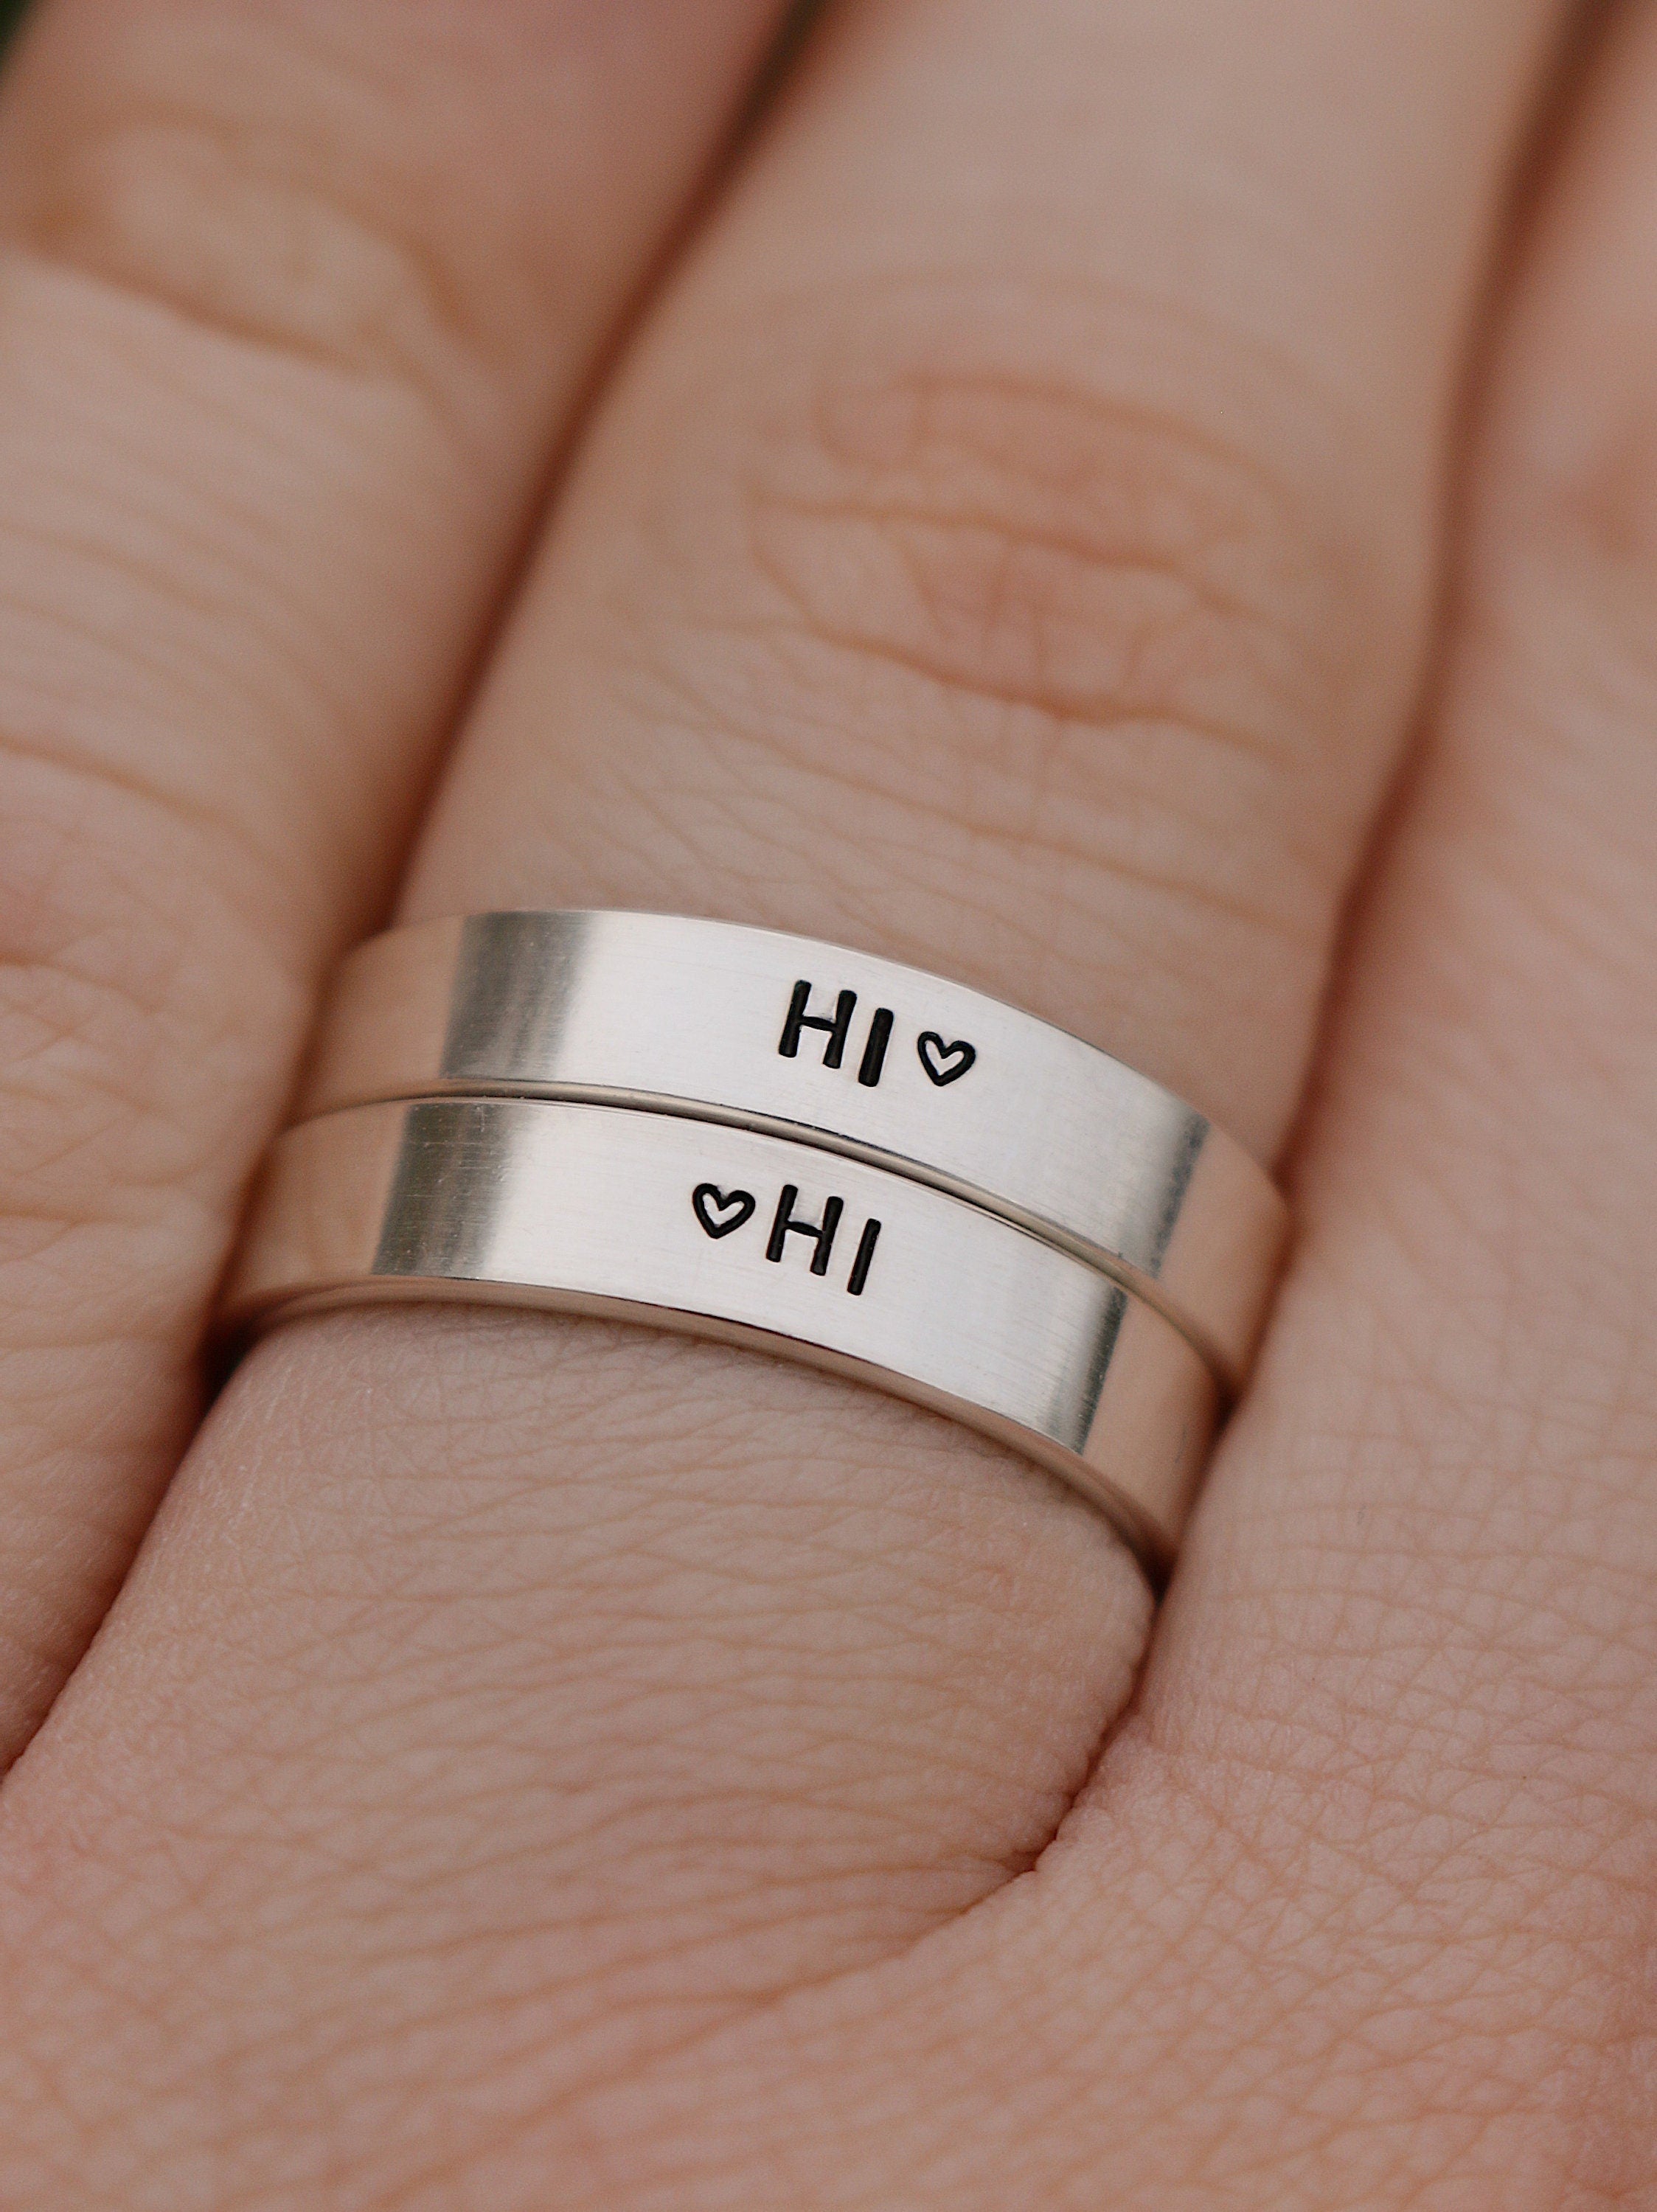 Hi Speech Bubble Ring Set | Gay Pride Jewelry | LGBTQ Friend Gift | Pride Jewelry | LGBTQ+ Pride Ring | Matching Couples Rings